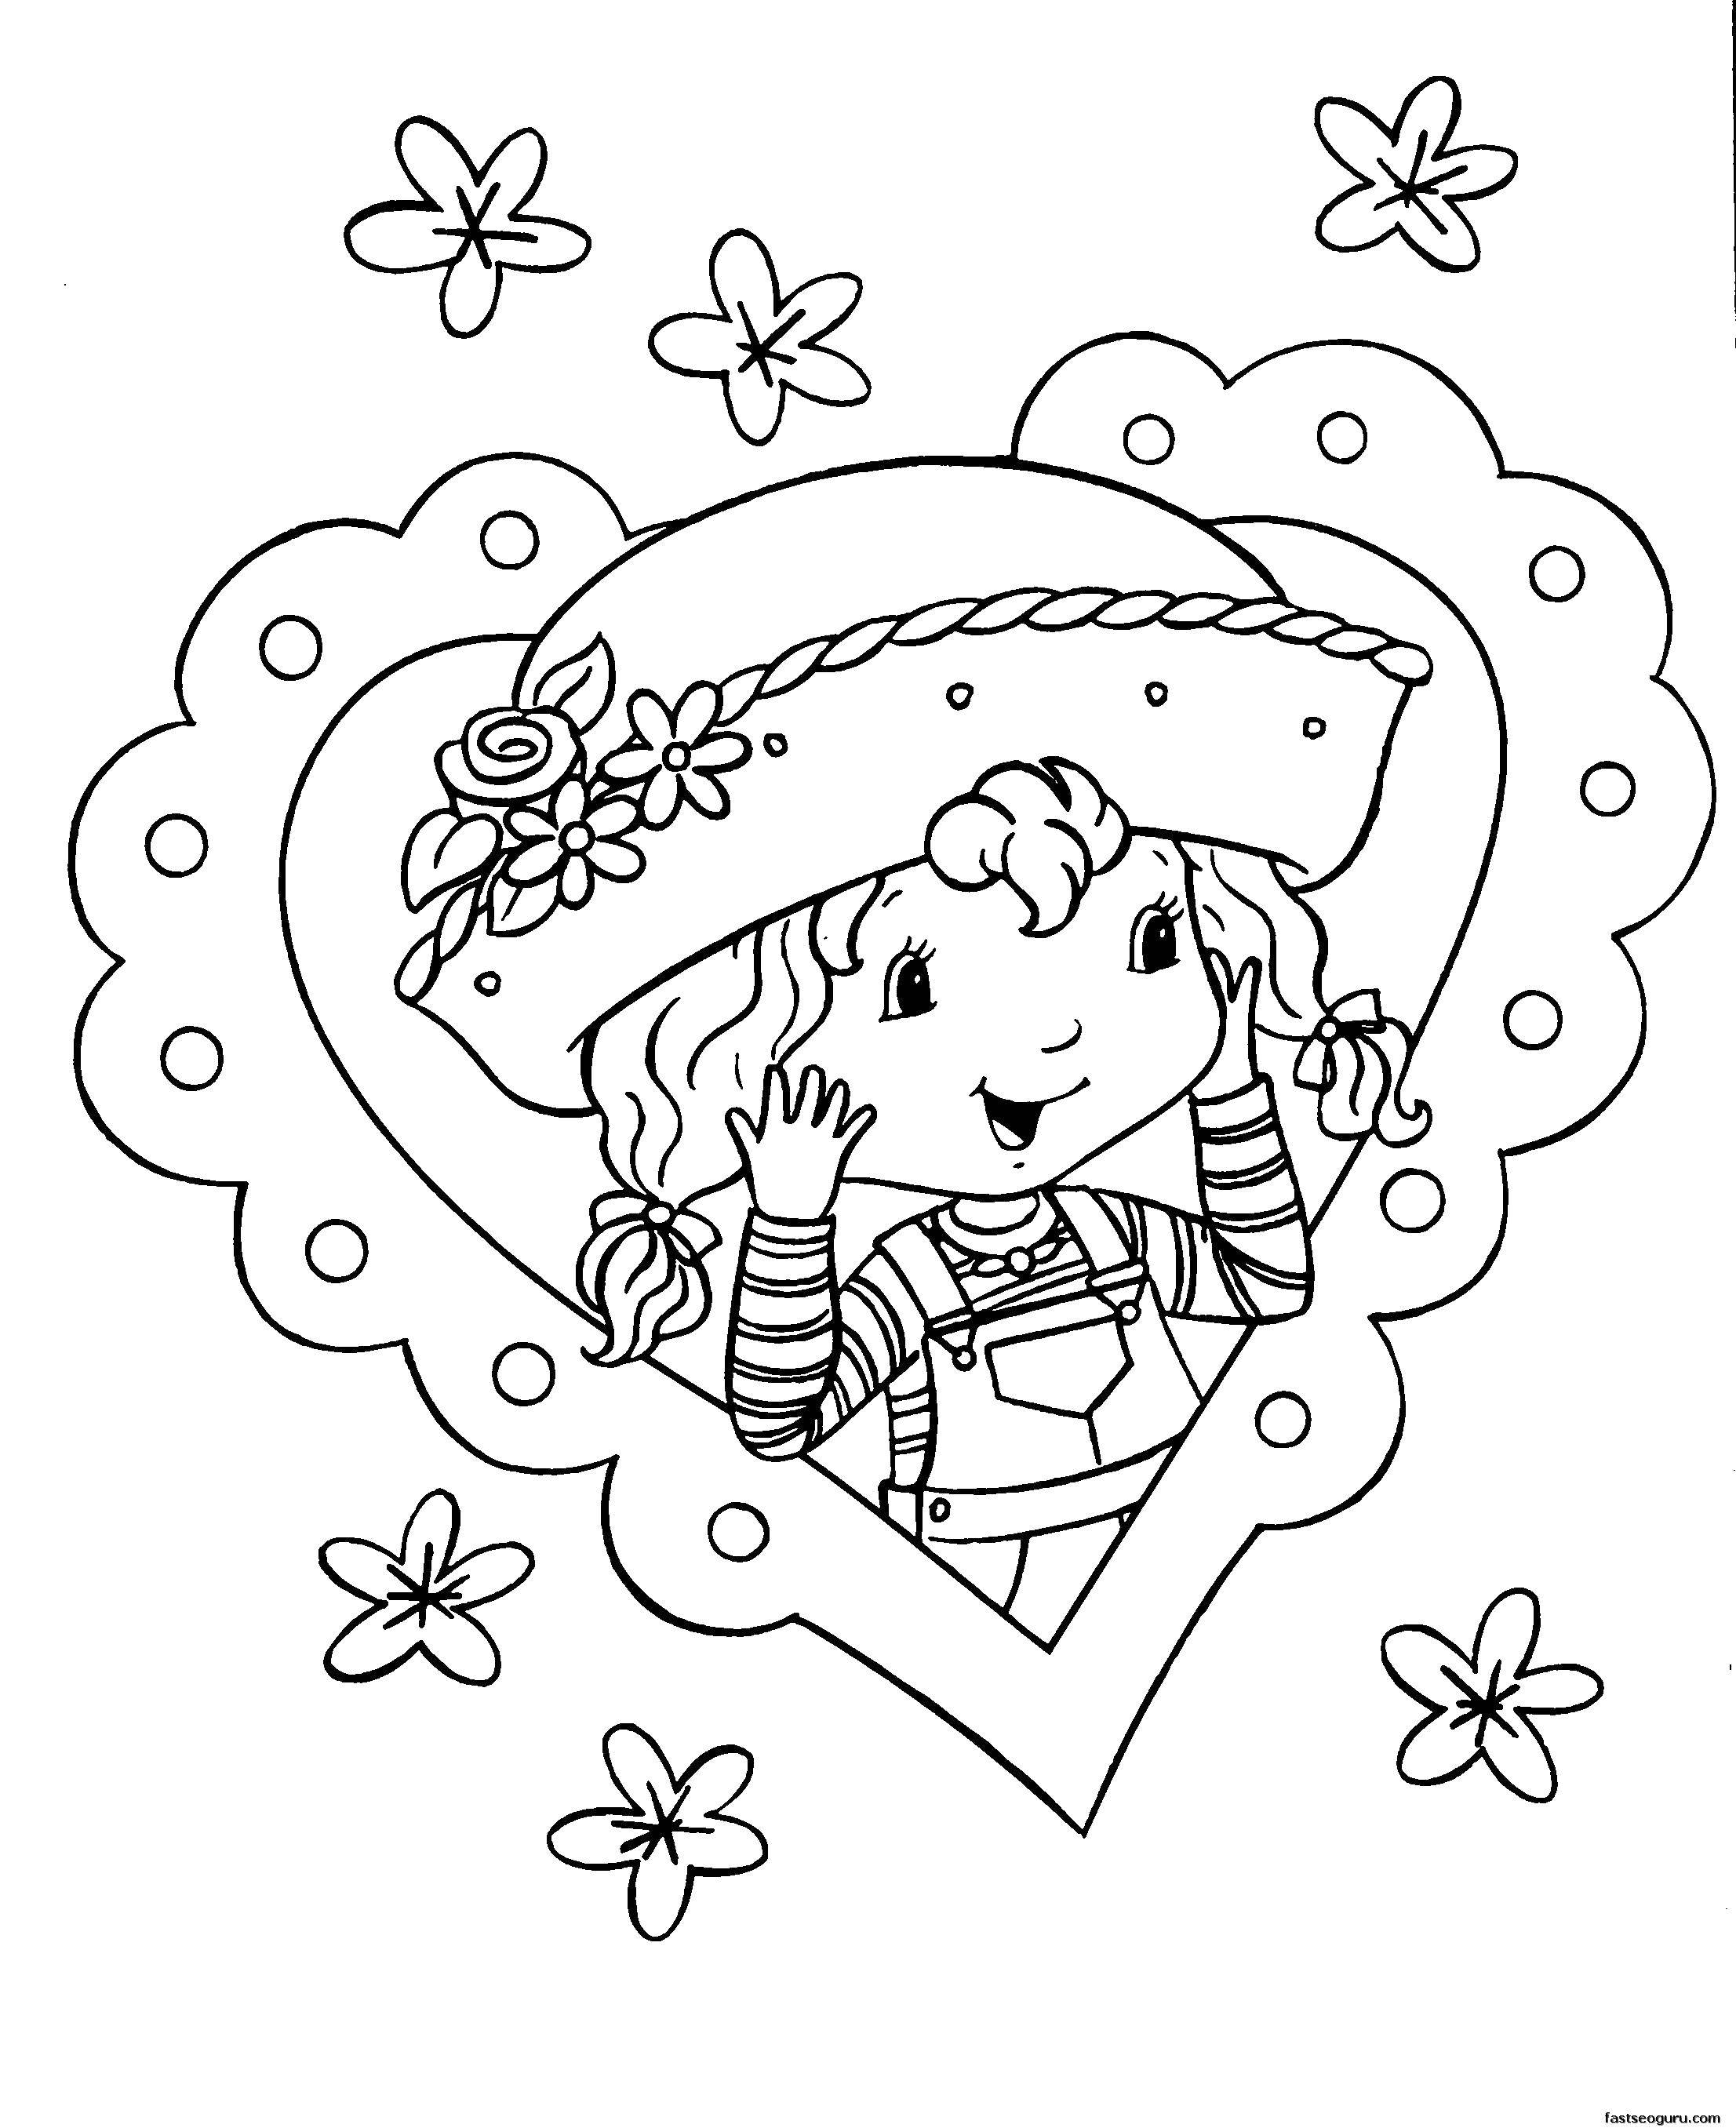 Coloring The girl in the heart. Category children. Tags:  Children, girl, flowers, heart.